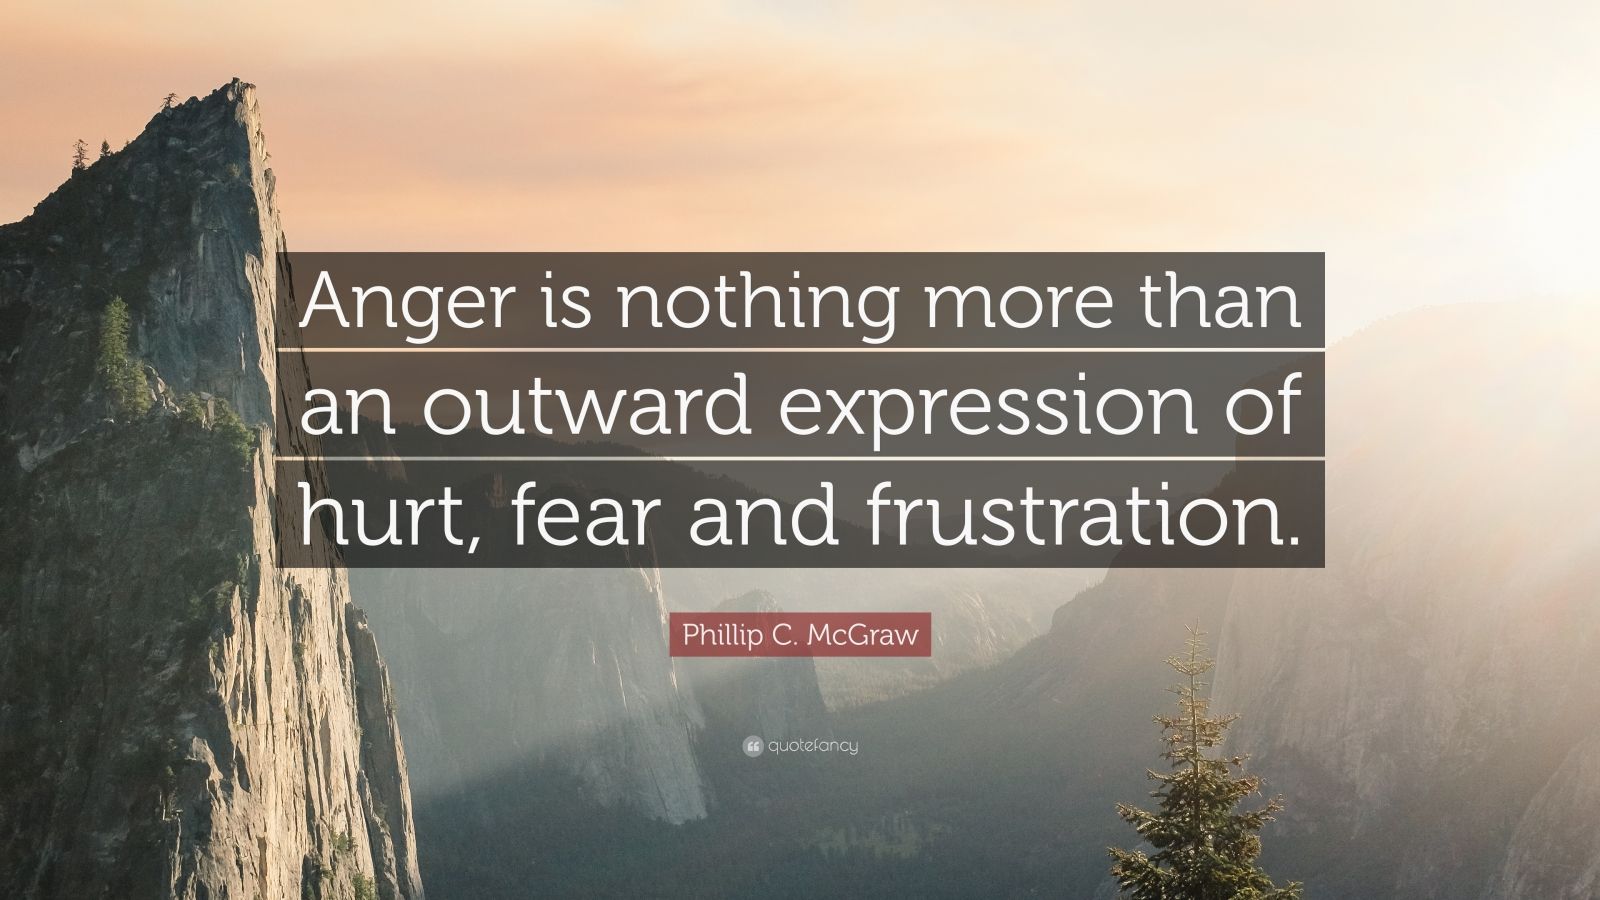 Phillip C. McGraw Quote “Anger is nothing more than an outward